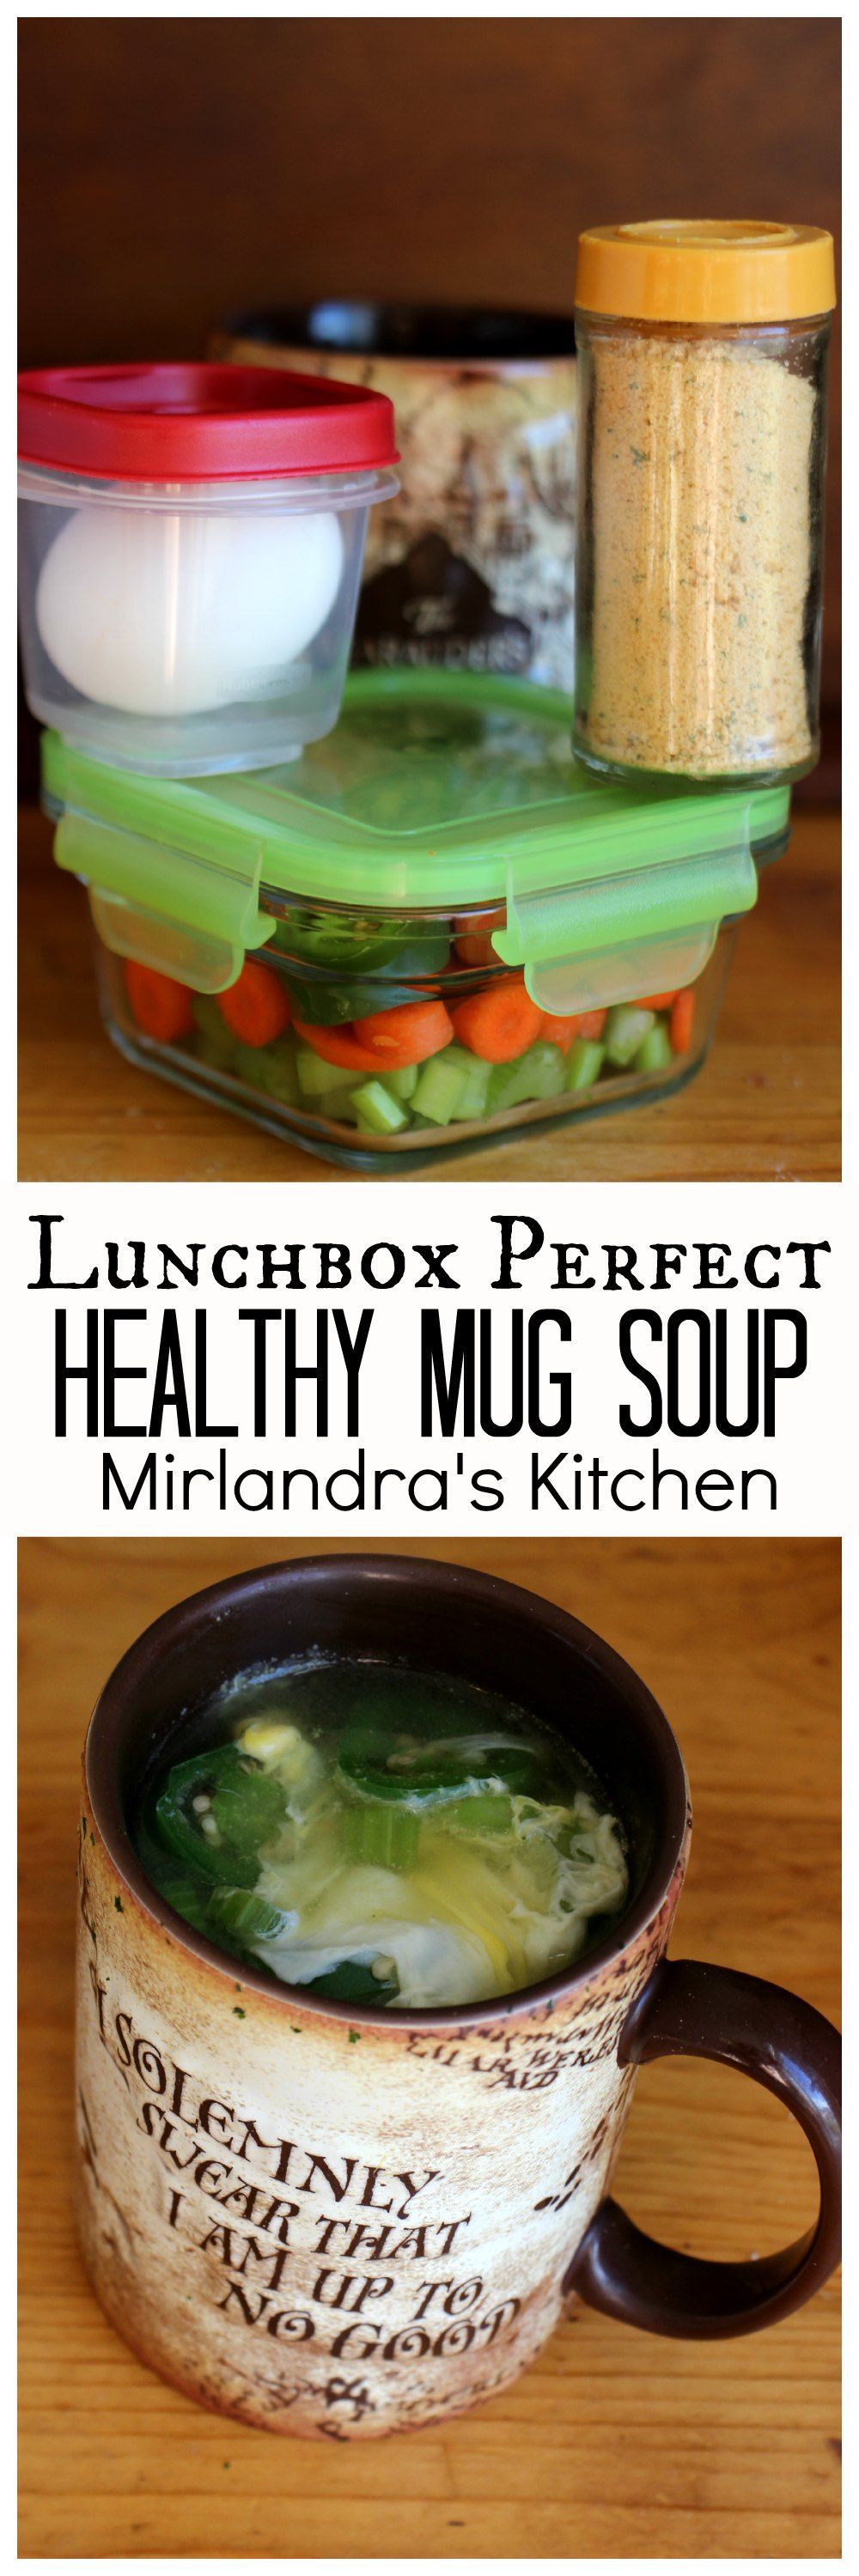 Healthy Mug Soup is a simple and delicious vegetable egg soup. Add this to your lunchbox routine – It is a